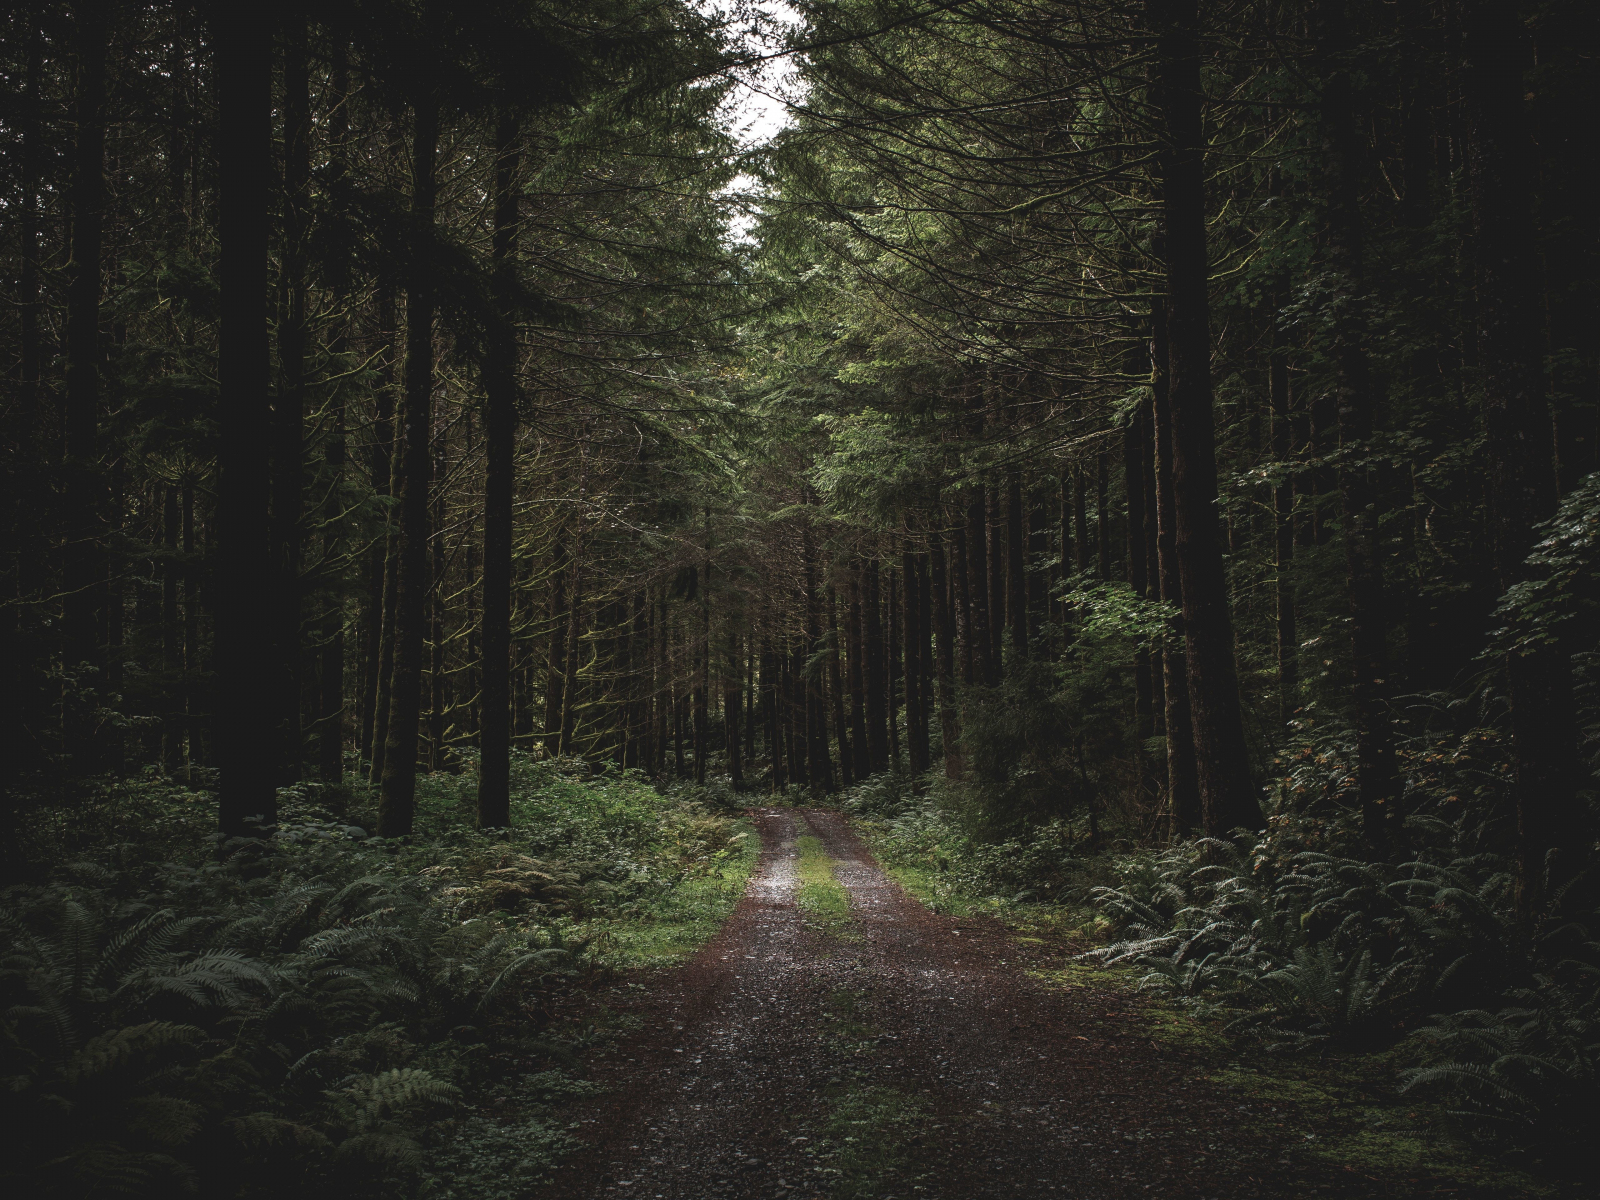 Dirt road, path, trees, forest, greenery, 1600x1200 wallpaper